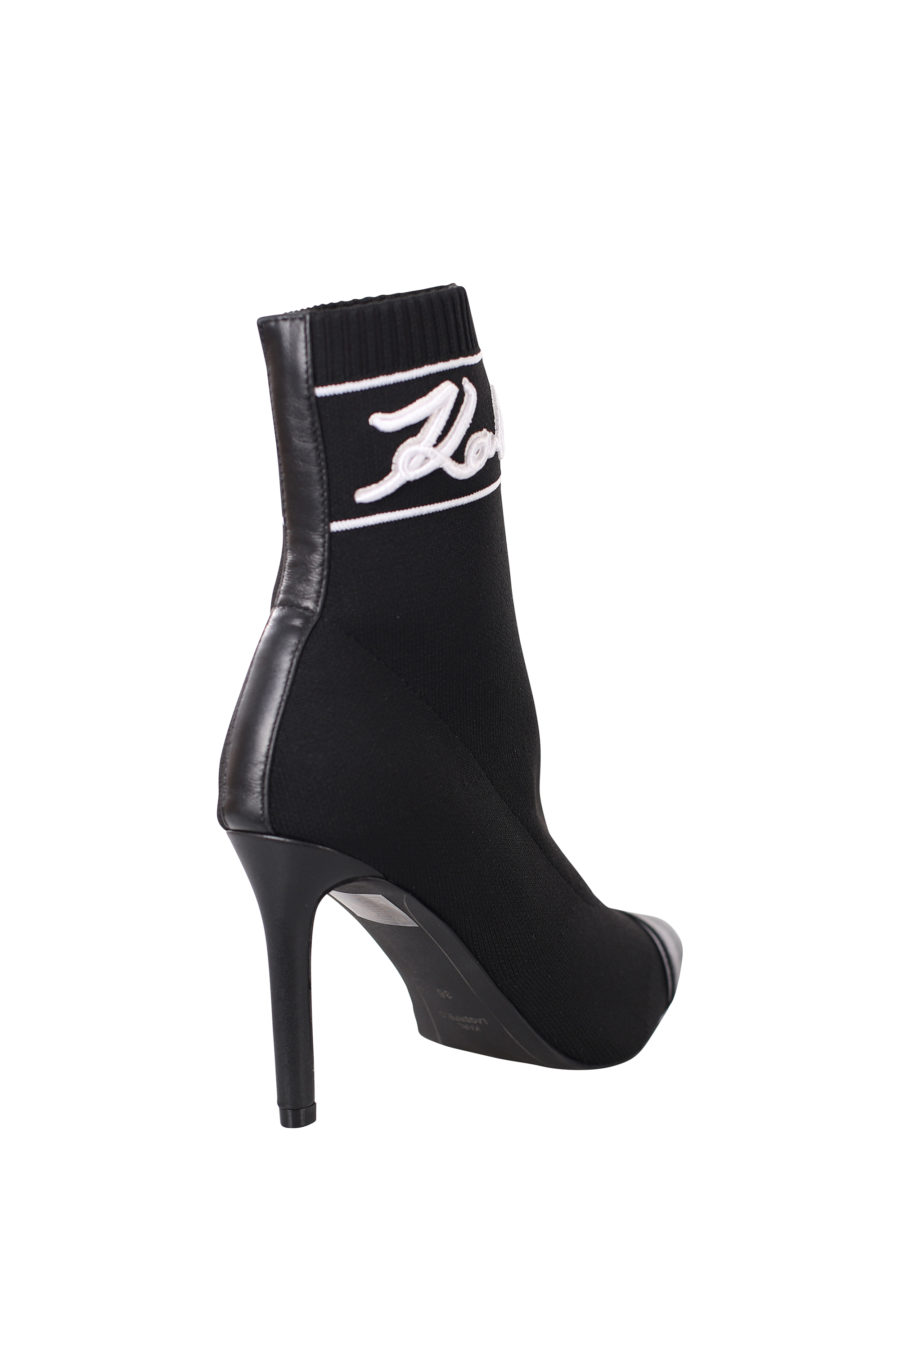 Black ankle sock ankle boots with white logo - IMG 0392